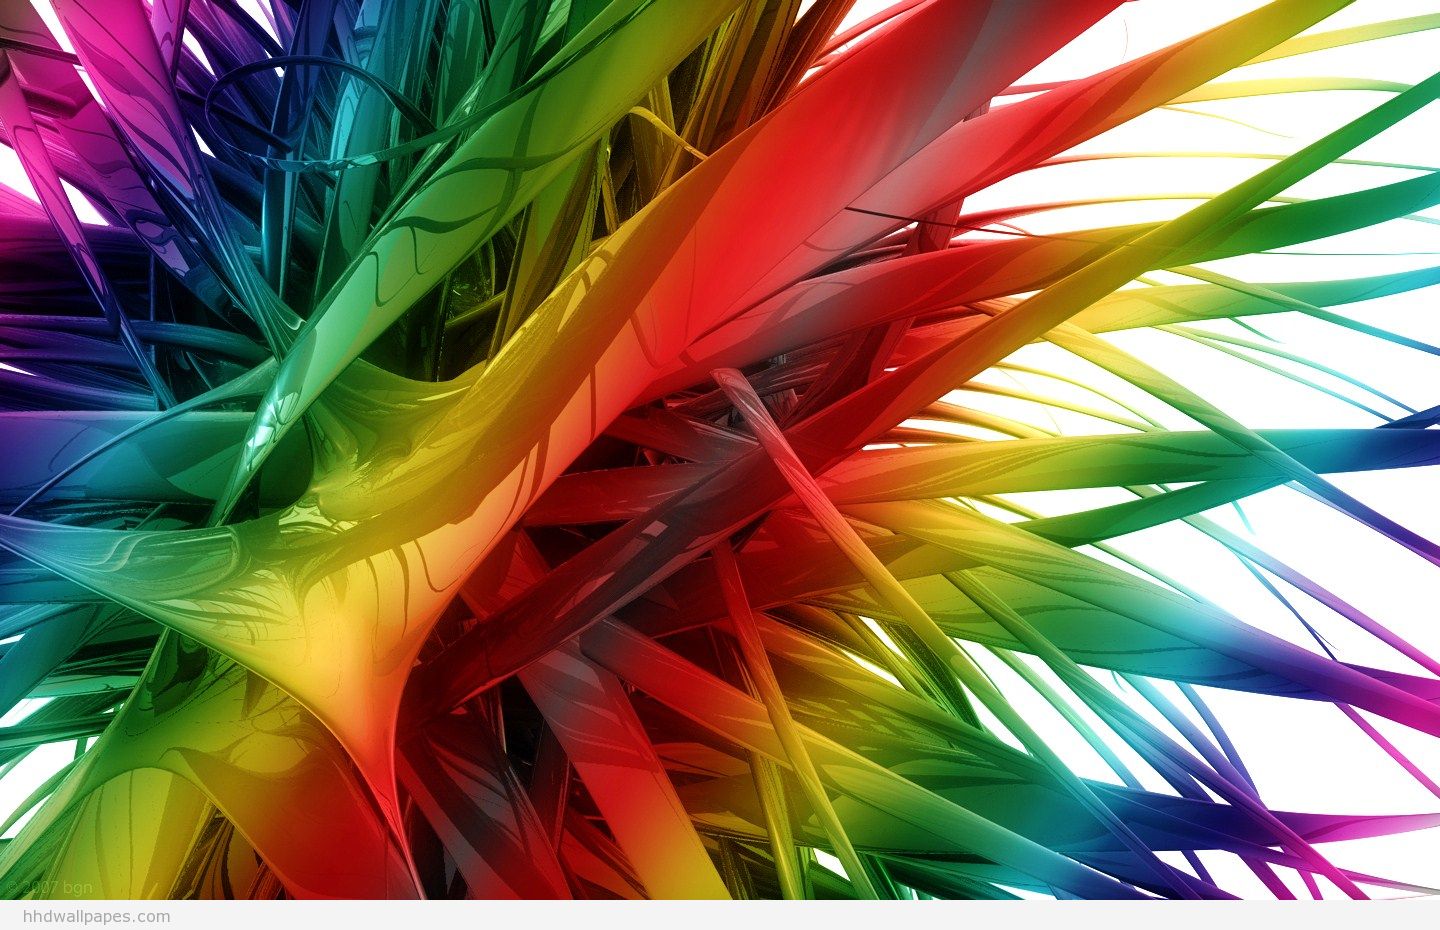 awesome colors cool wallpapers share this cool wallpaper on facebook 1440x930